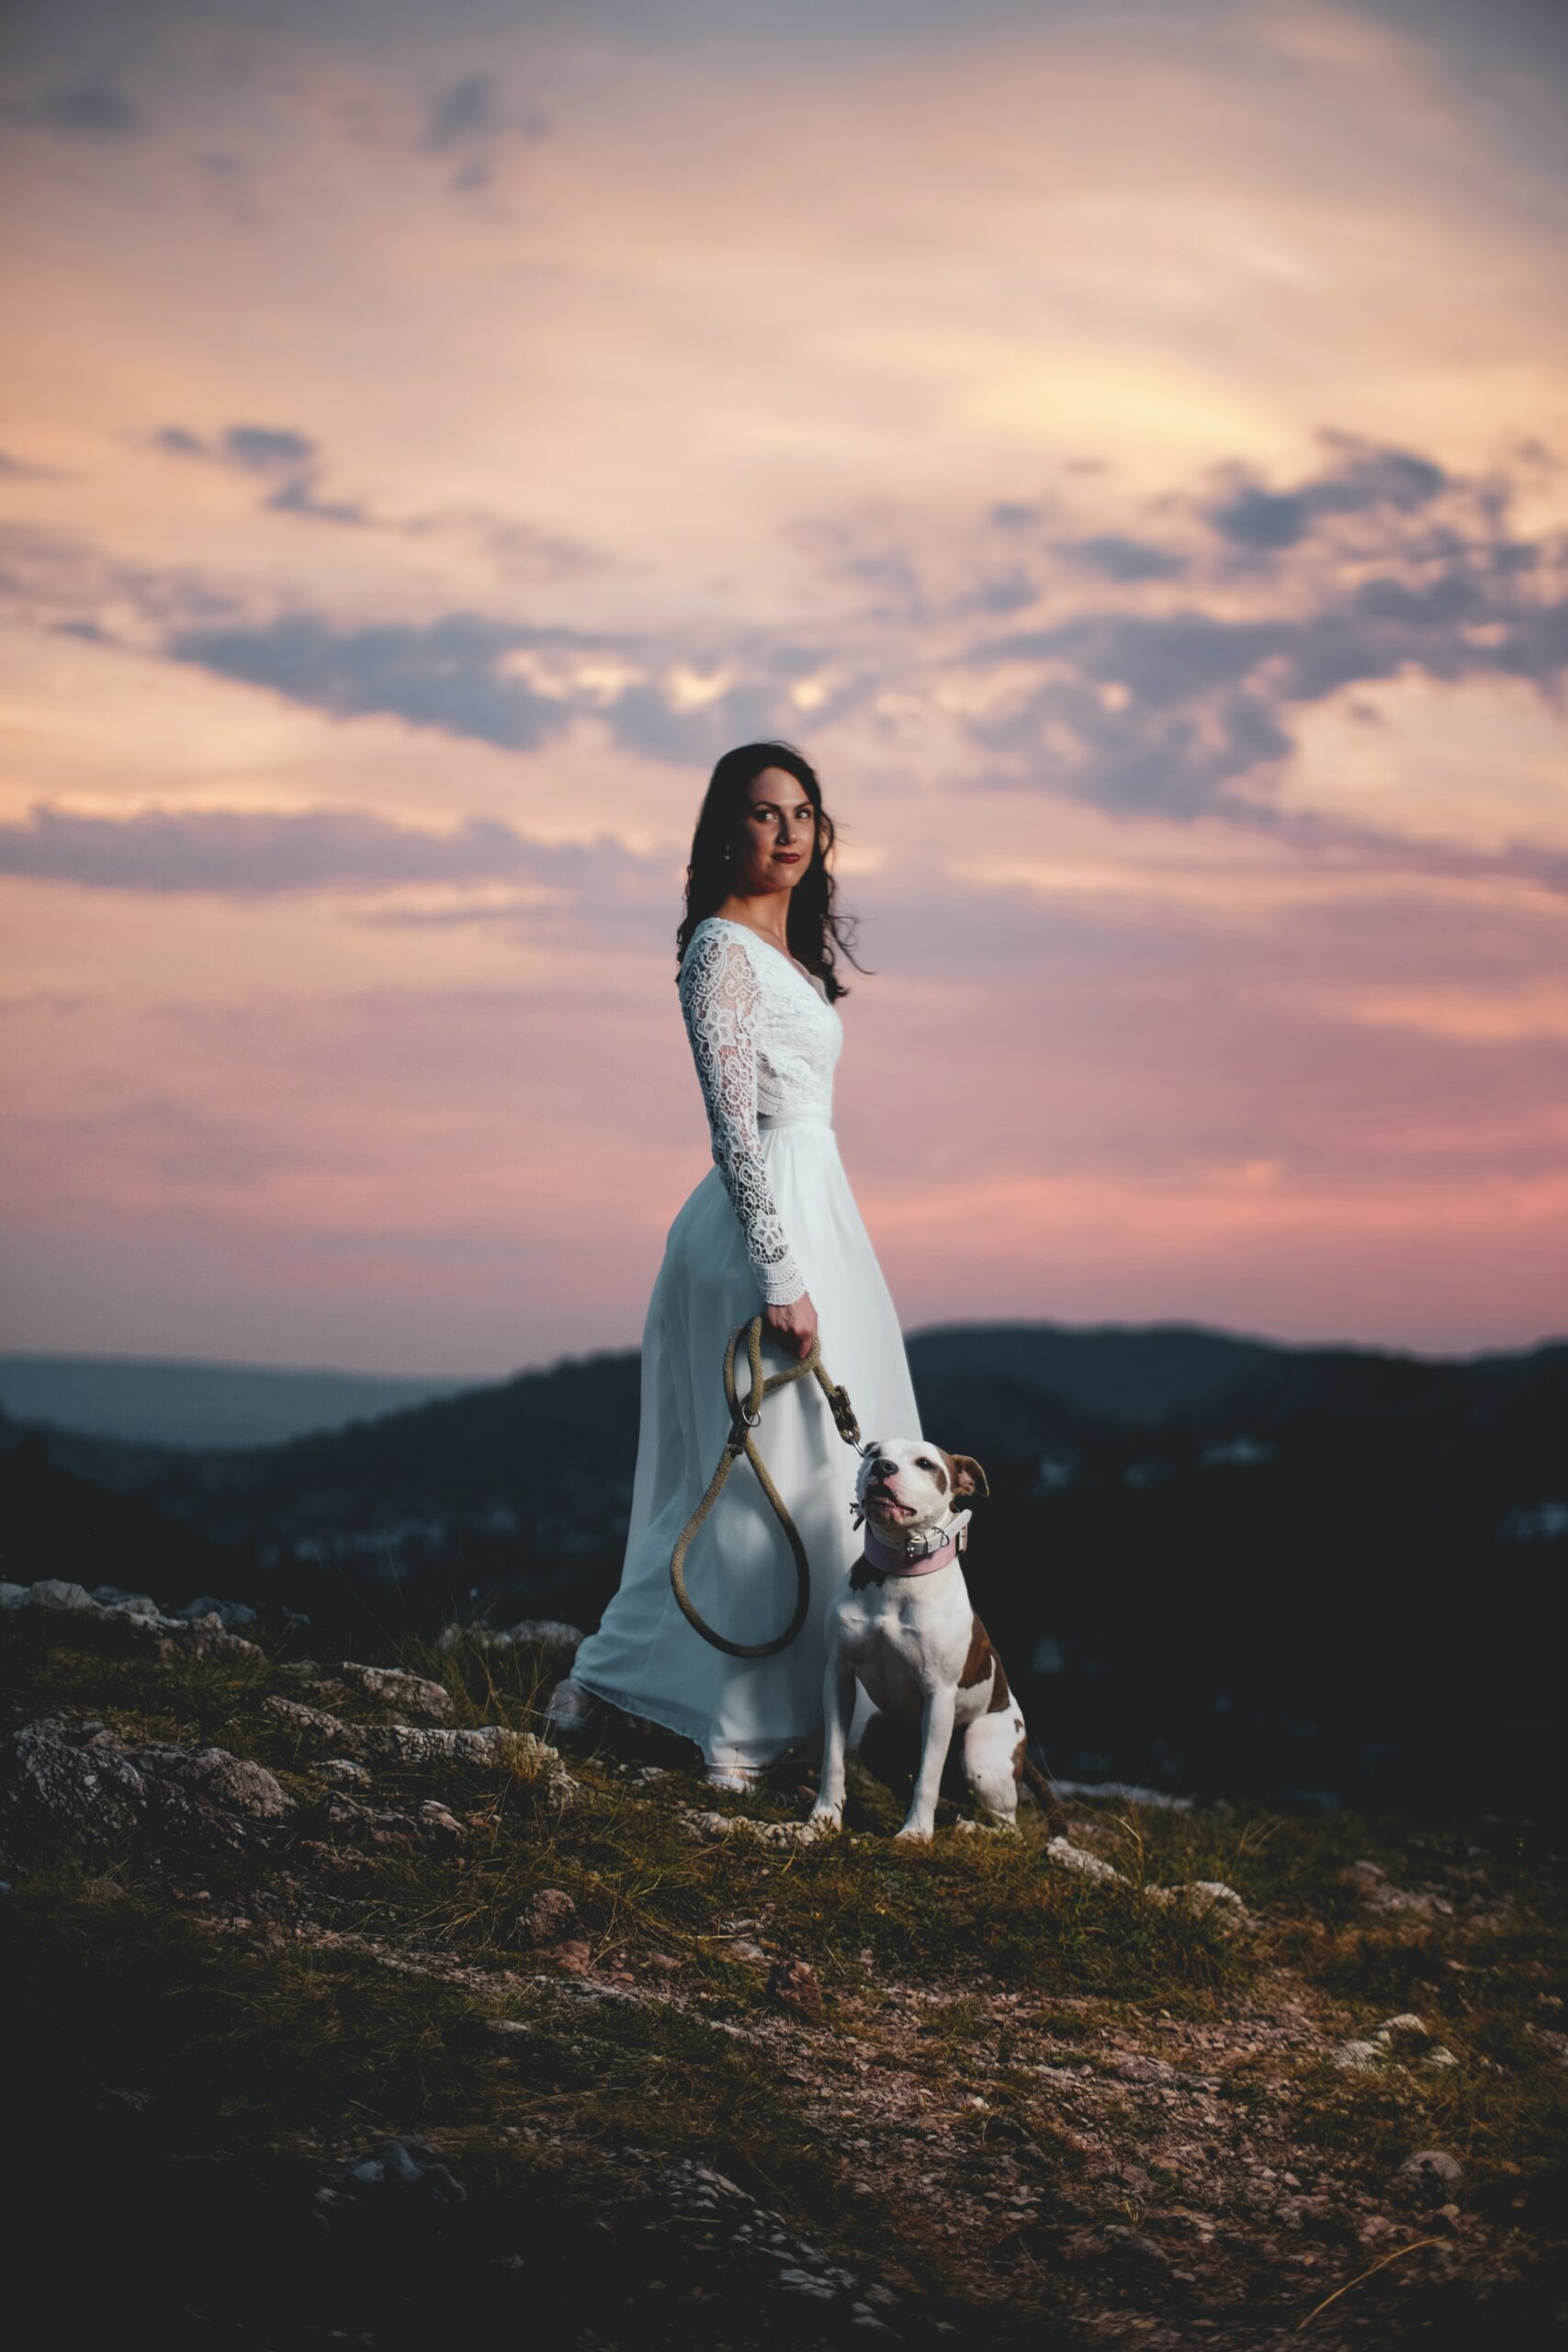 Finding the Perfect Way to Include Your Dog in Your Wedding